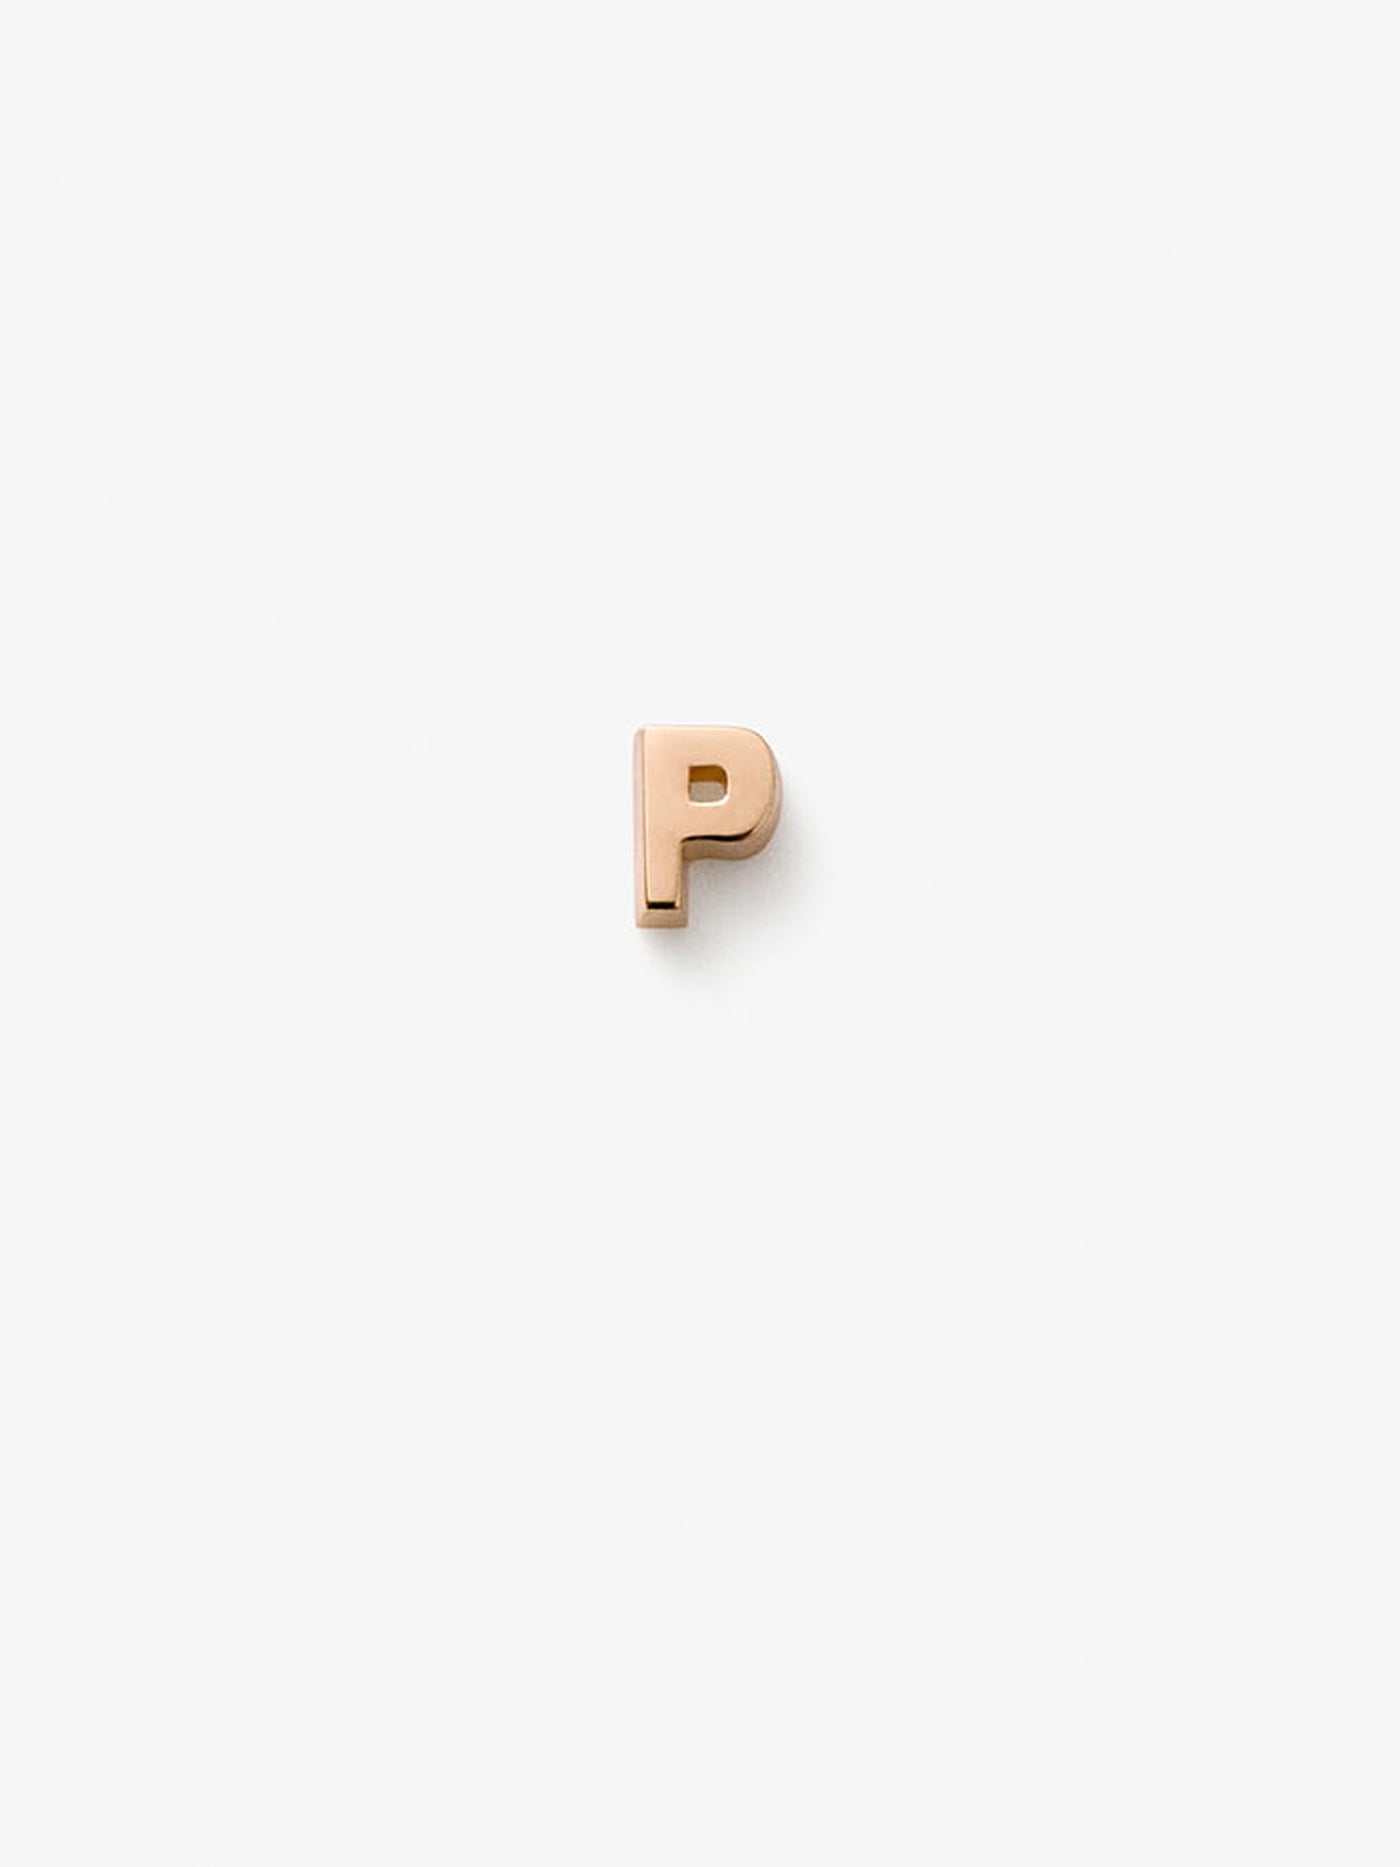 Miniature letter P single stud earring in 18k solid gold with a butterfly fastening for pierced ears